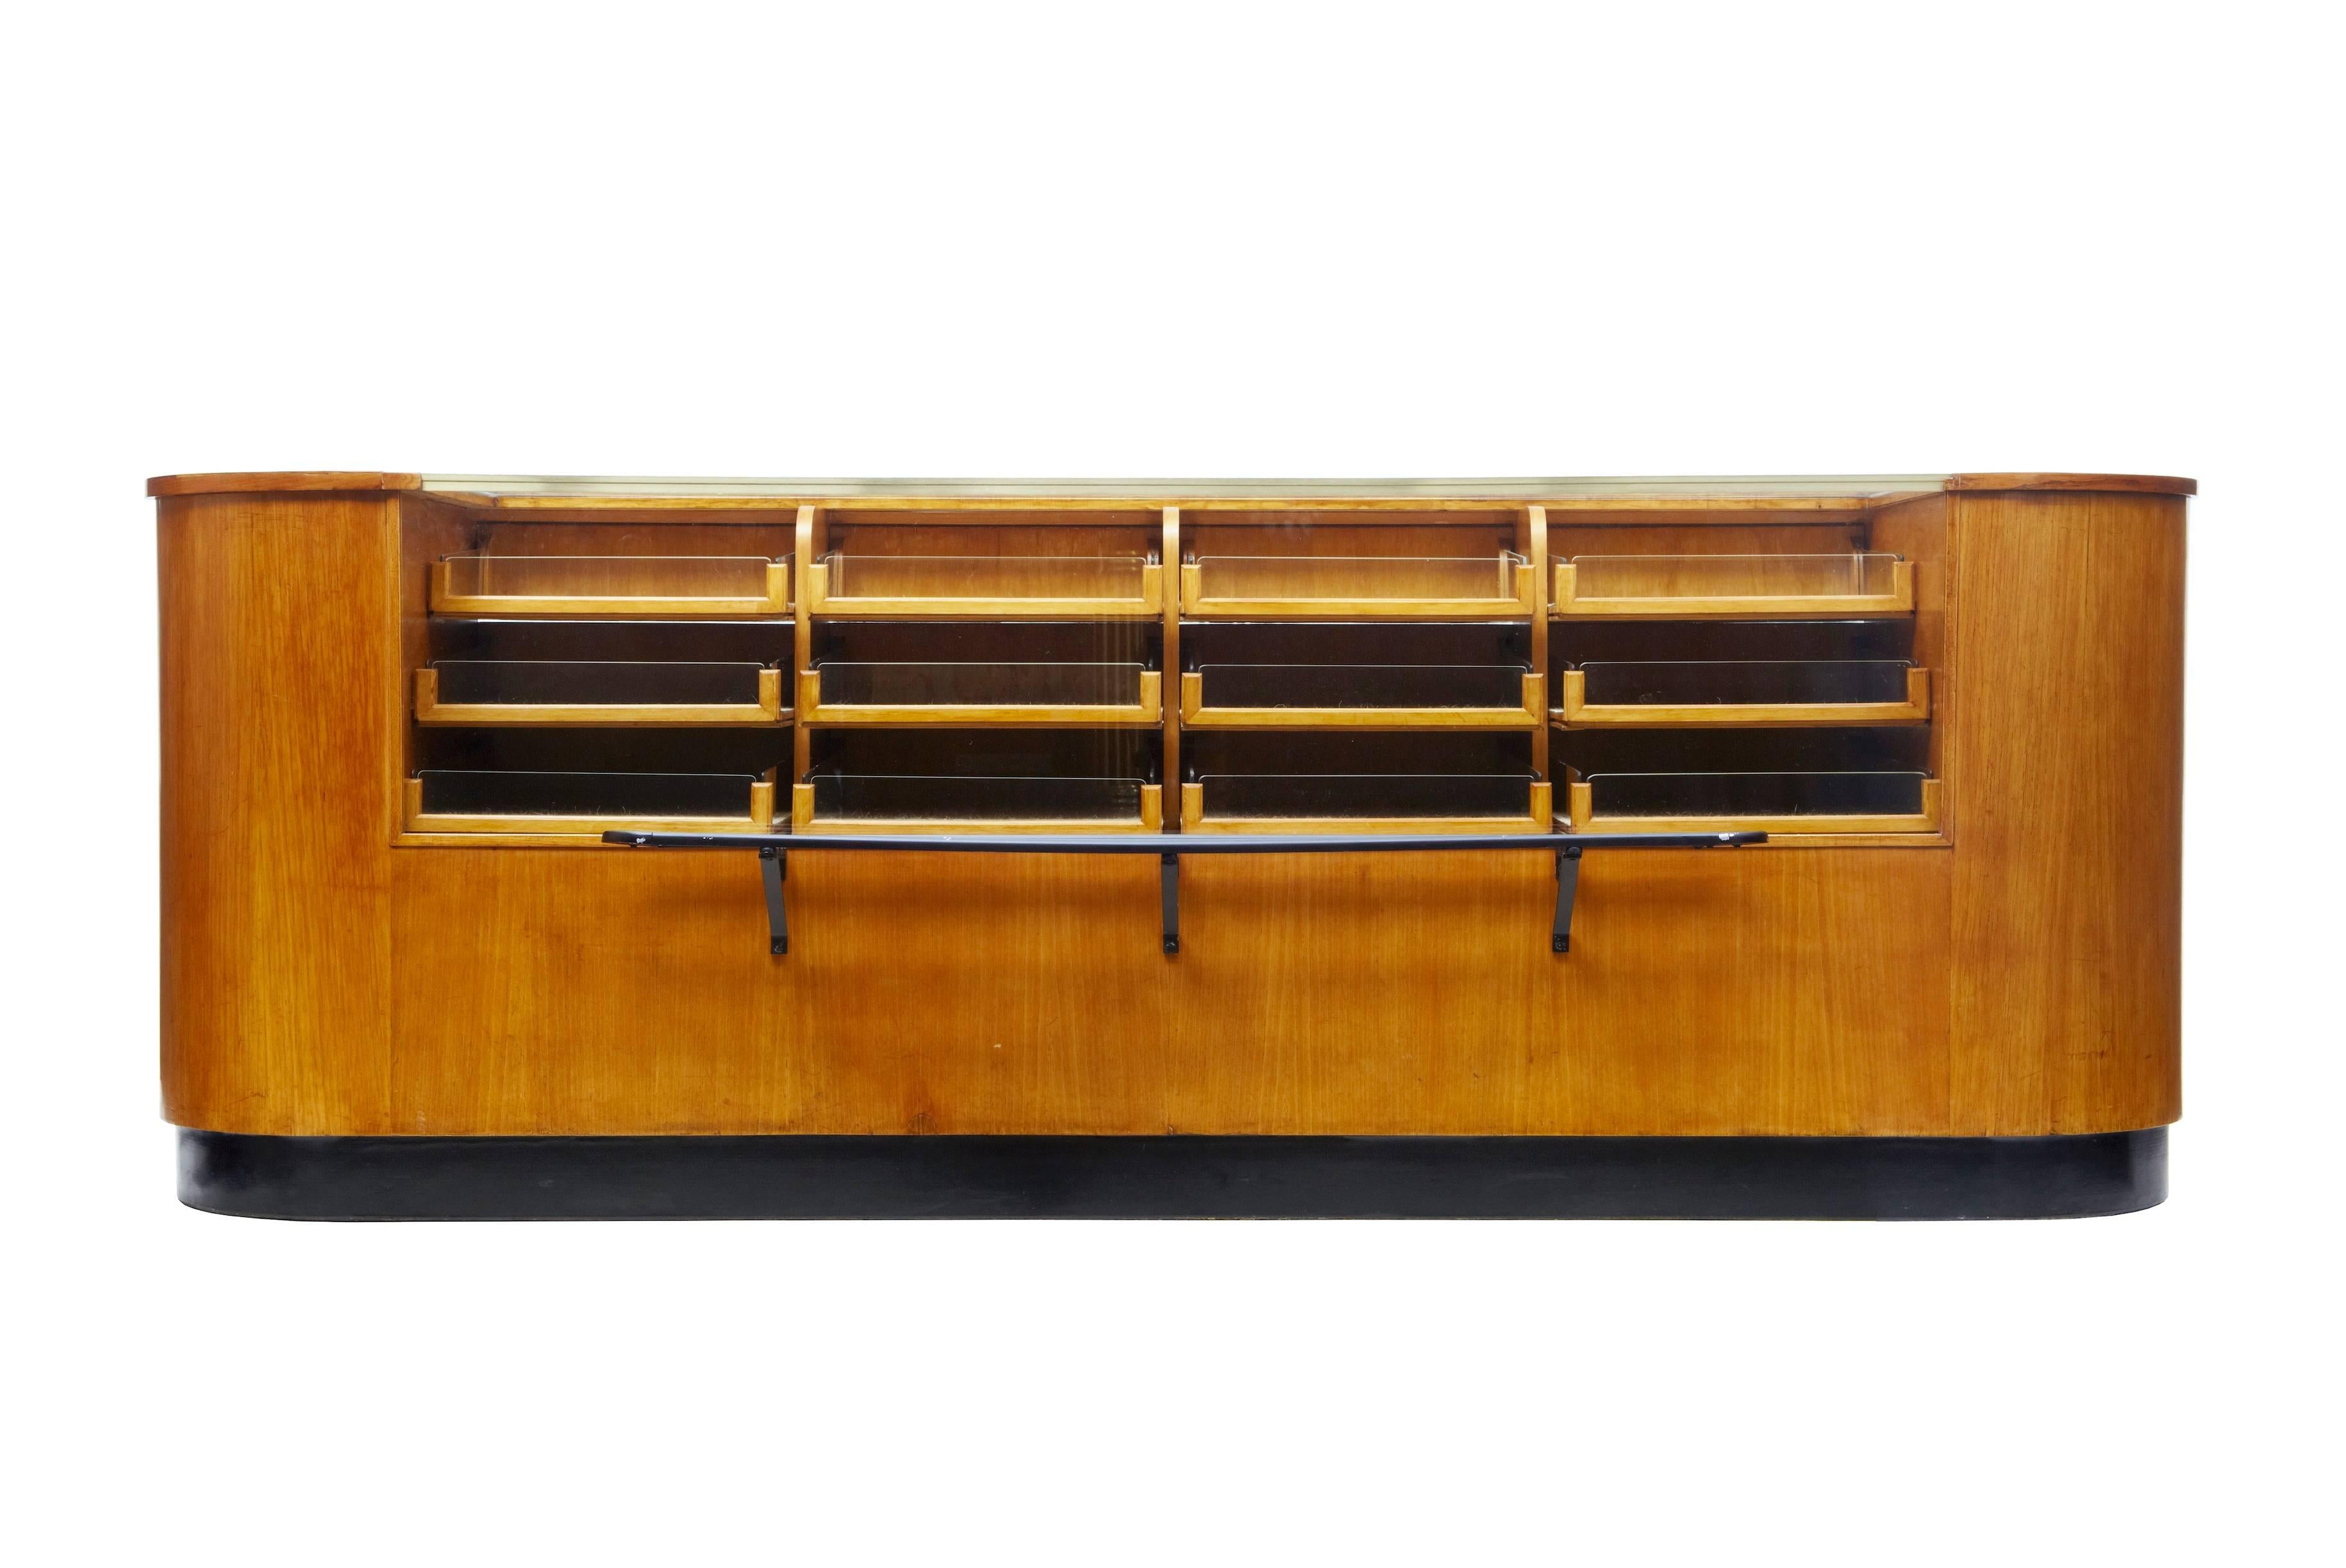 Here we have a stunning Art Deco shop display which is among the finest you will find on the internet, circa 1920.
Shaped oak ends with ebonized plinth to the front which drawers your attention to the glazed front and layered drawers.
To the